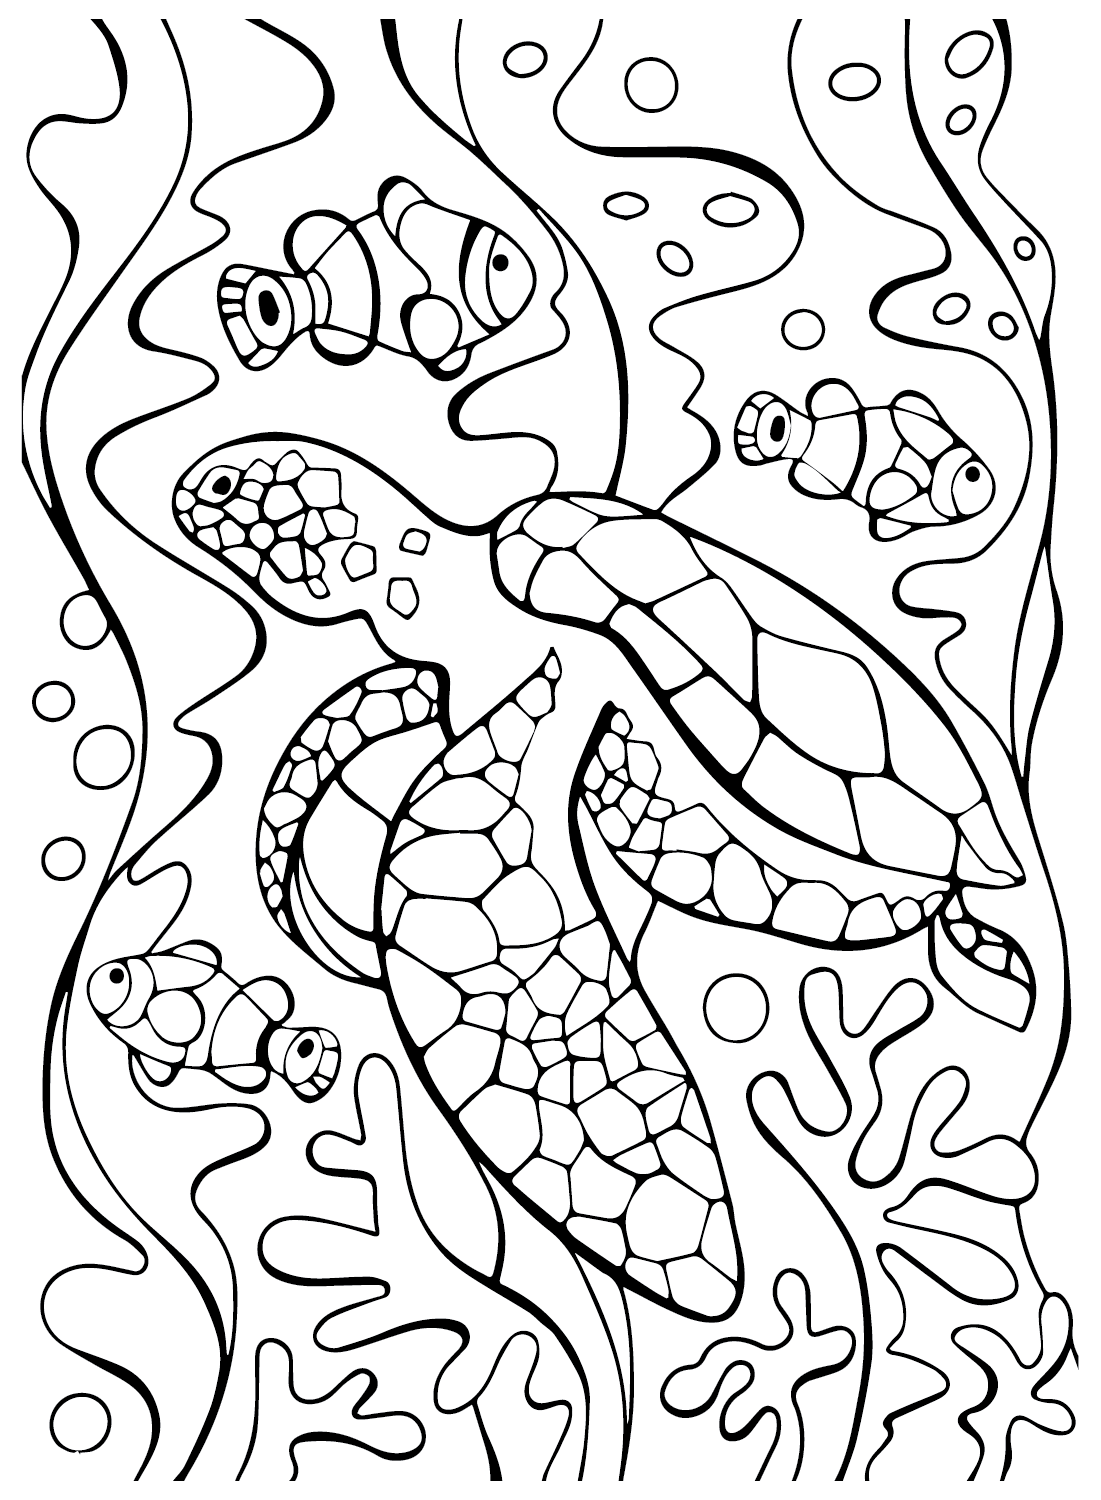 Clownfish and Turtle Coloring Pages